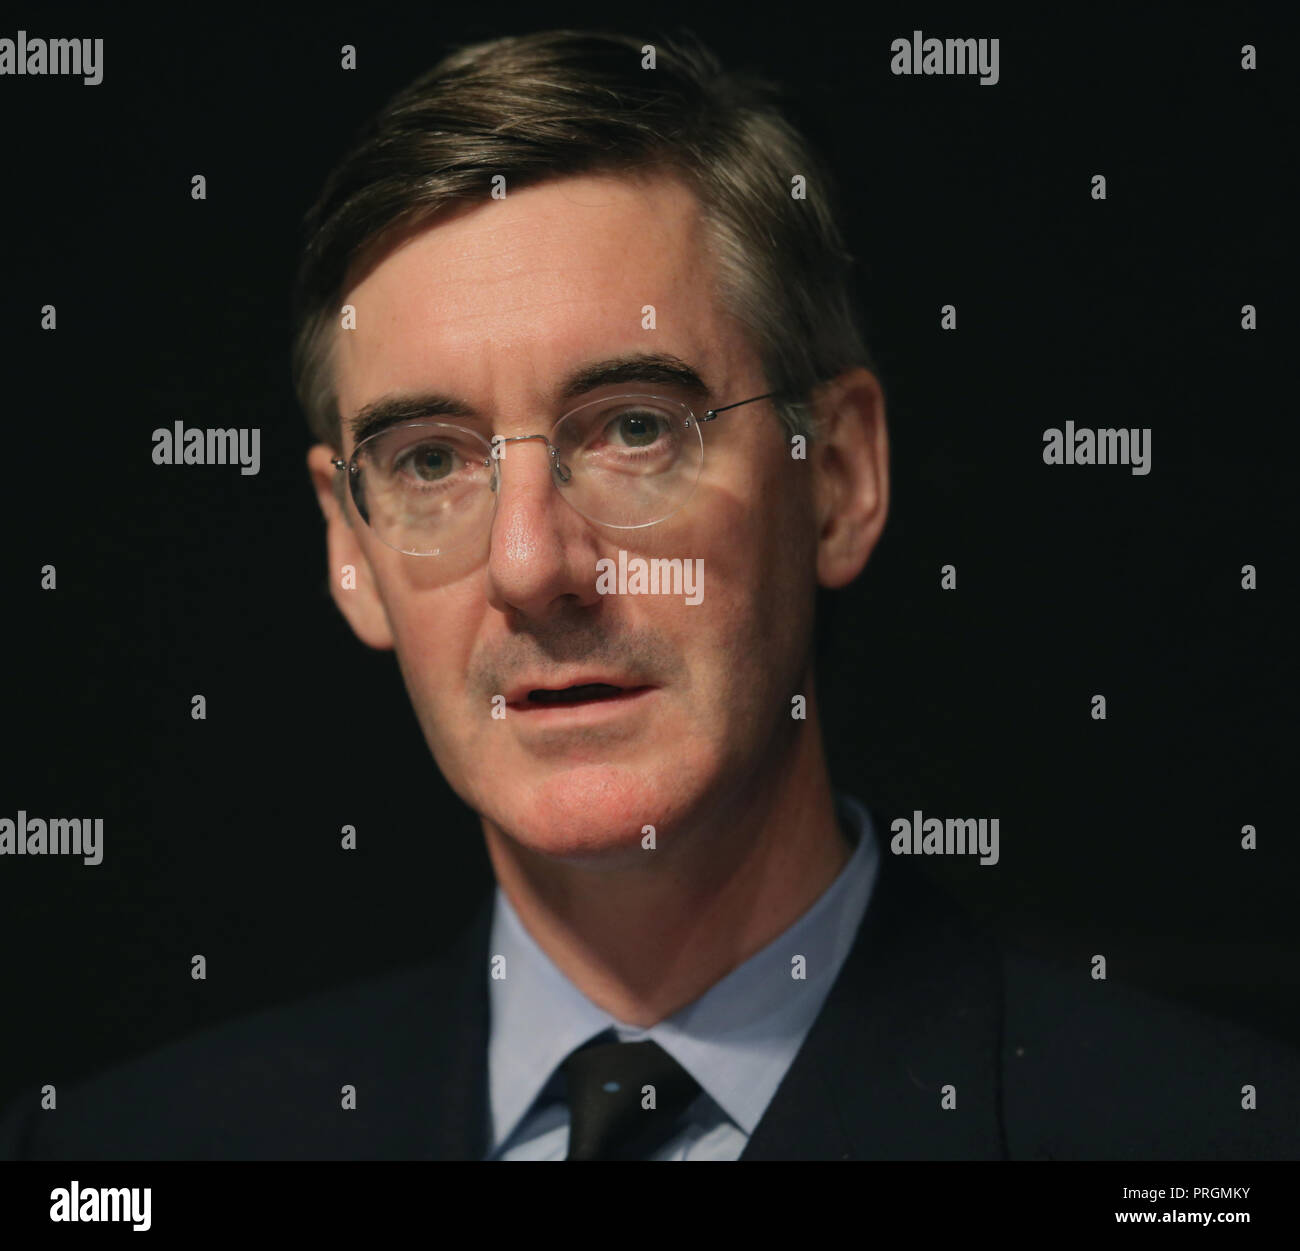 JACOB REES-MOGG MP, CONSERVATIVE MP 2018 Stock Photo